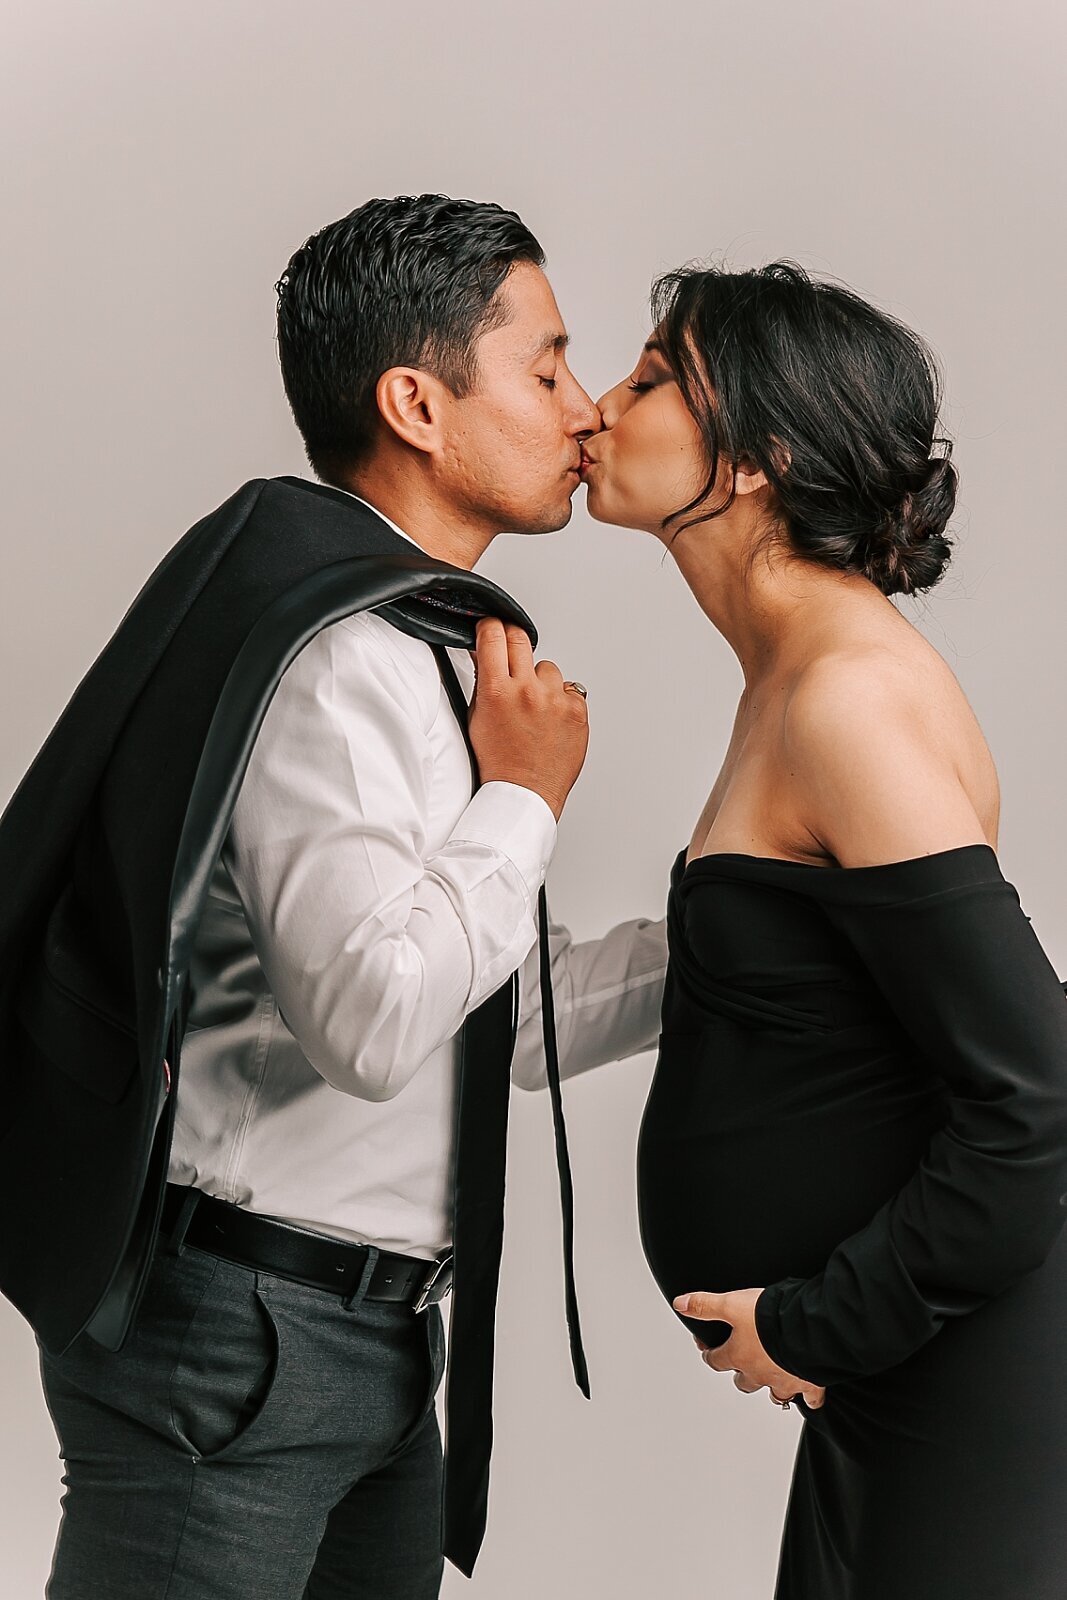 mom and dad kissing while she holds her belly. she is wearing a black dress and he is wearing a suit.